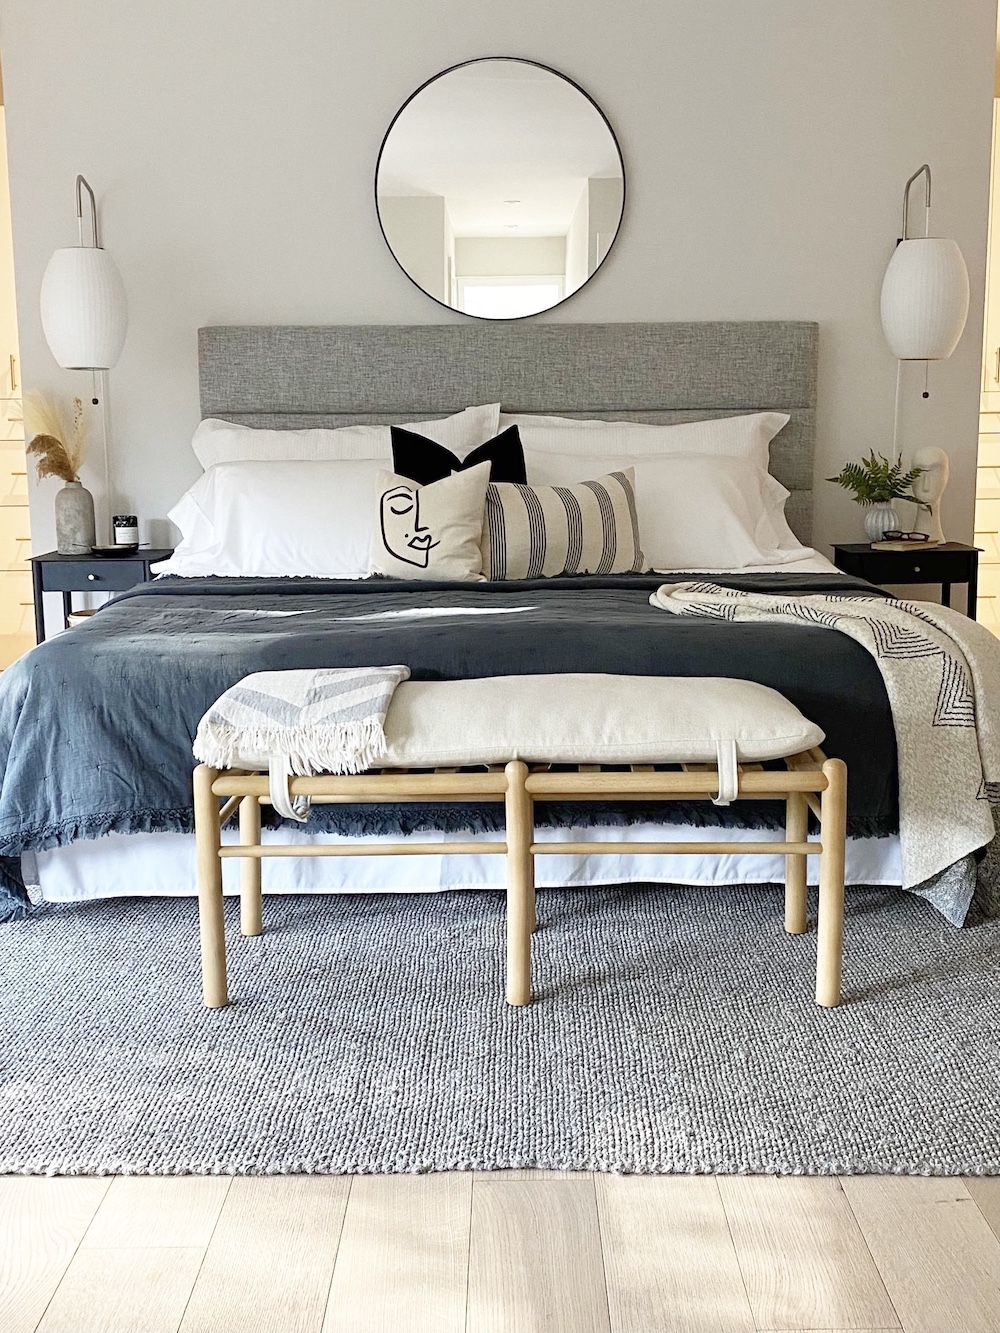 Calm bedroom designed and styled by The Property Stylist Inc. with a large bed with a large upholstered grey headboard, white pillows, a blue throw, a bench sitting at the end of the bed, two large wall sconces on either side of the bed, and large round mirror above the bed